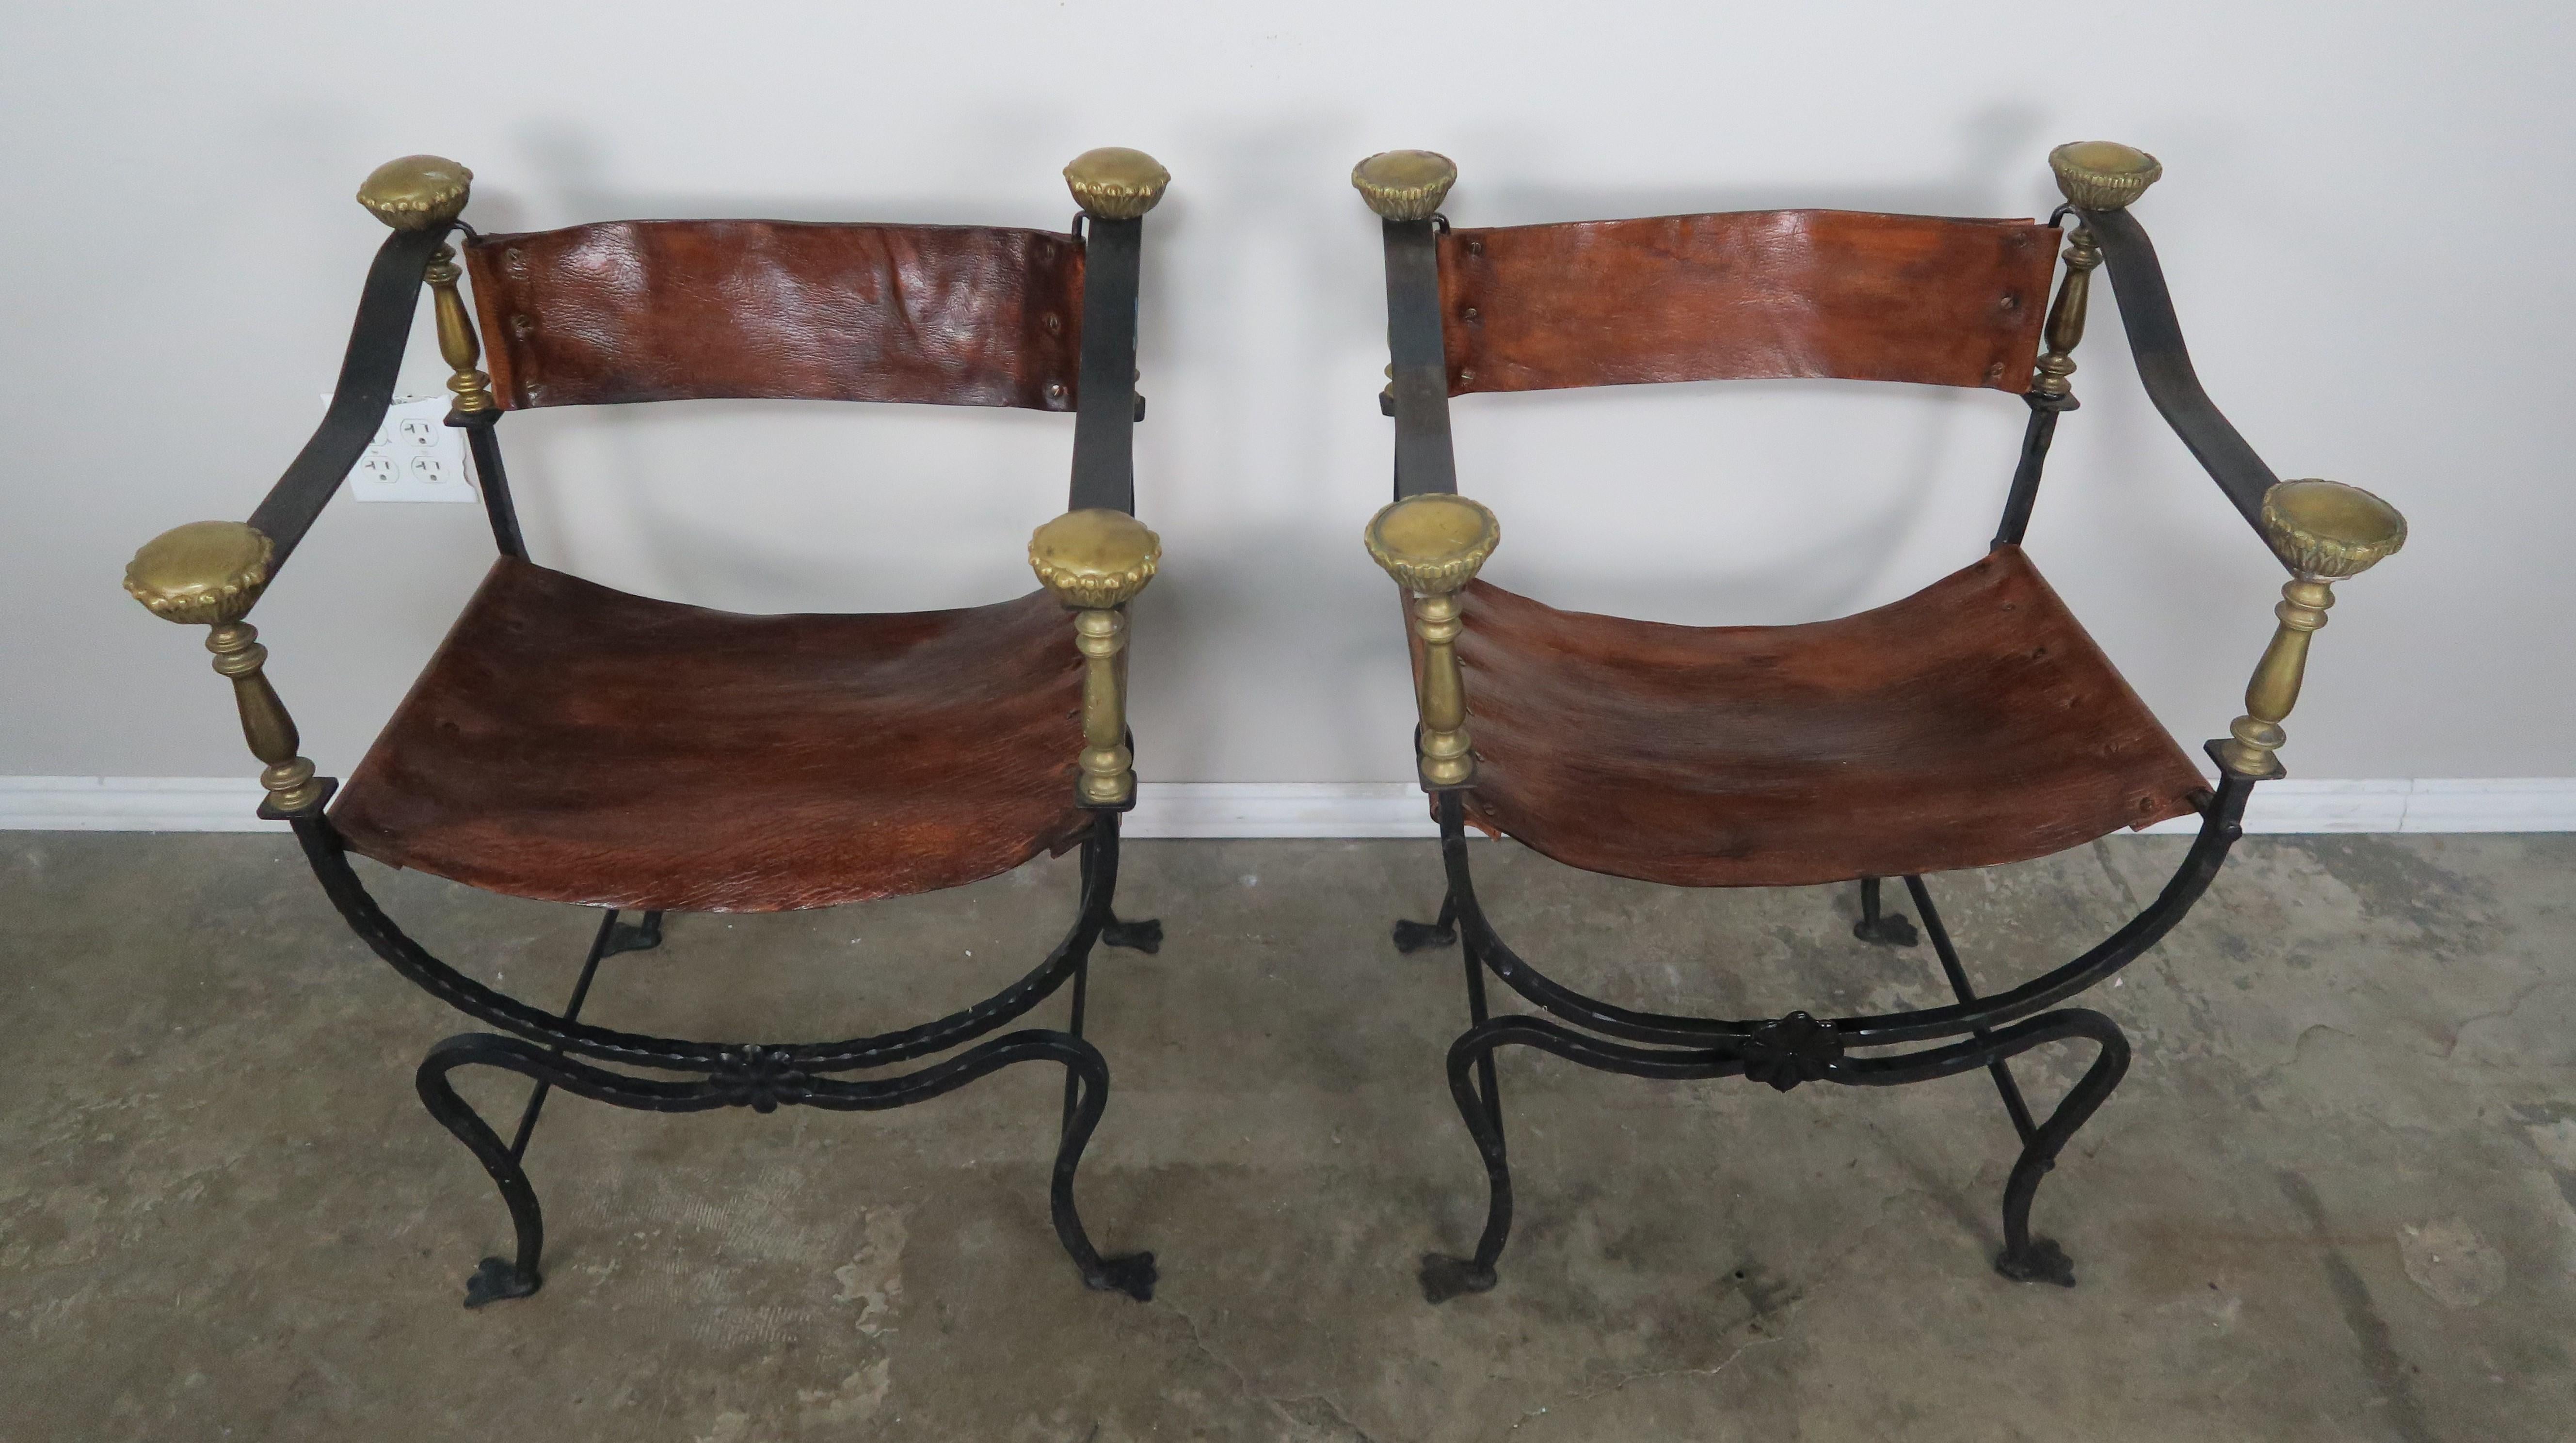 Baroque Pair of Bronze Wrought Iron and Leather Chairs